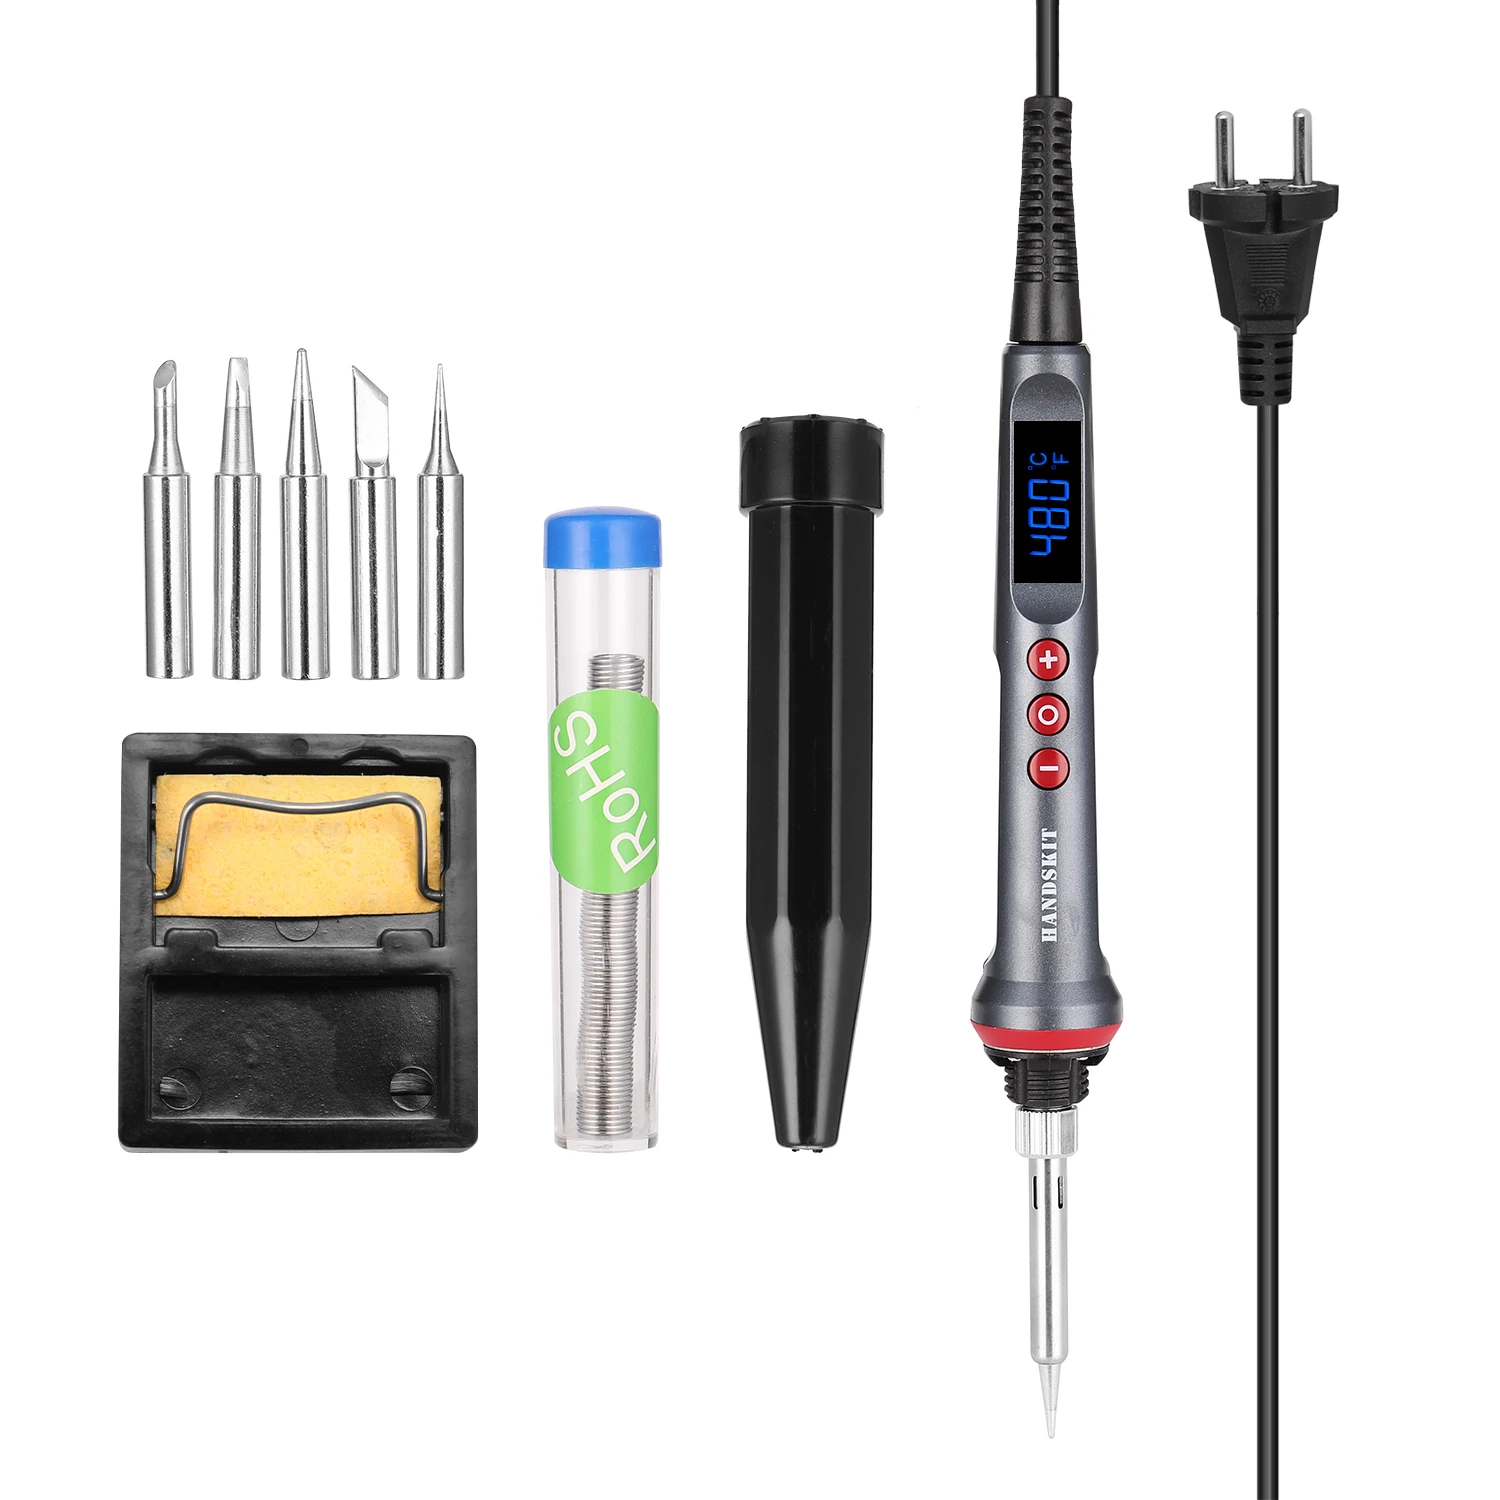 HANDSKIT 90W LED Soldering Iron Set Adjustable Temperature Soldering Iron 4 Wire Core Welding Tools with Automatic Sleep